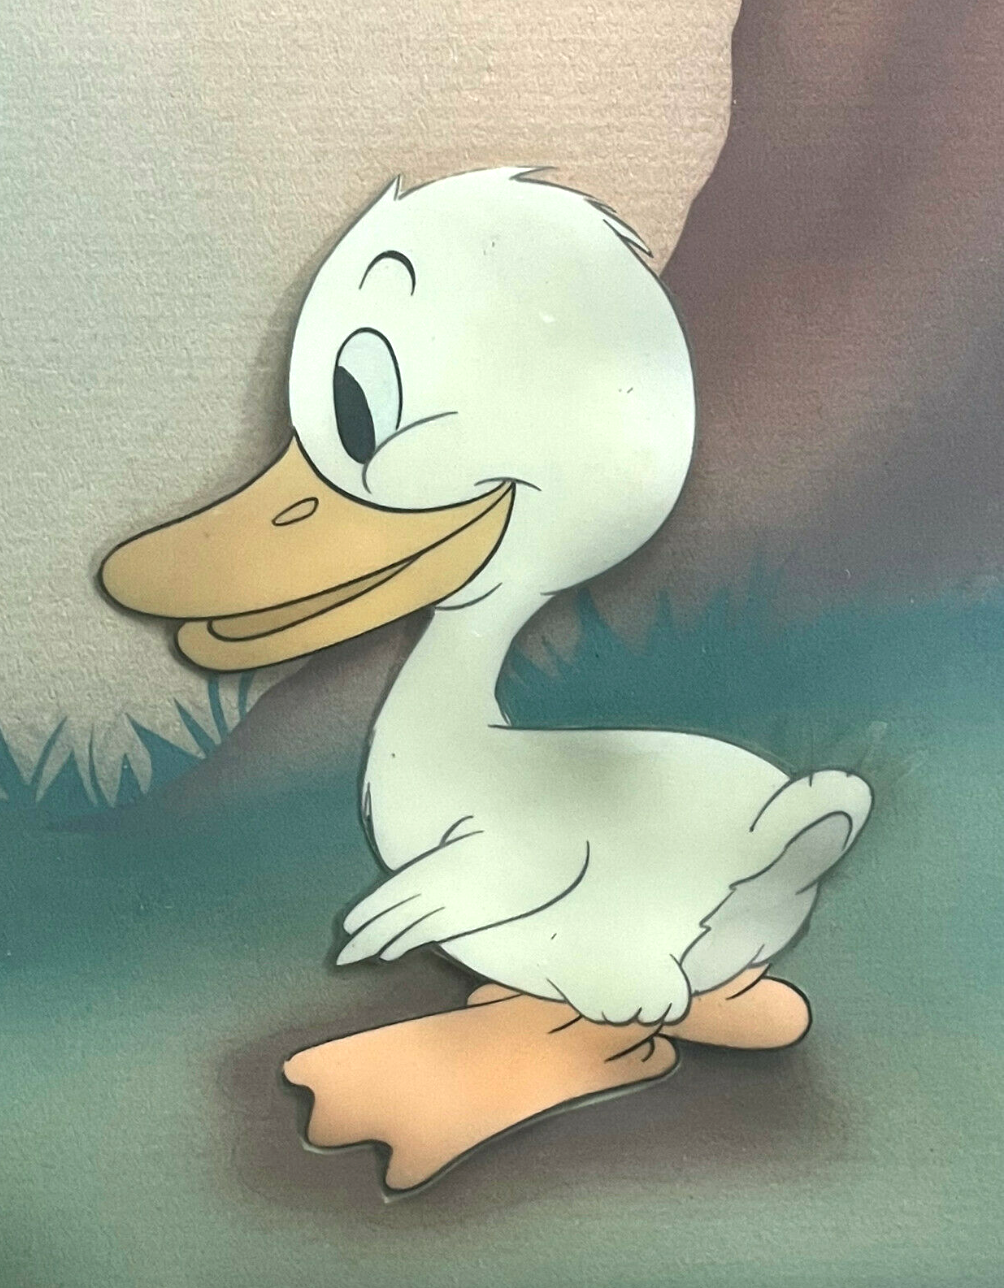 Original Walt Disney Production Cel on Courvoisier Background from The Ugly Duckling (1939)